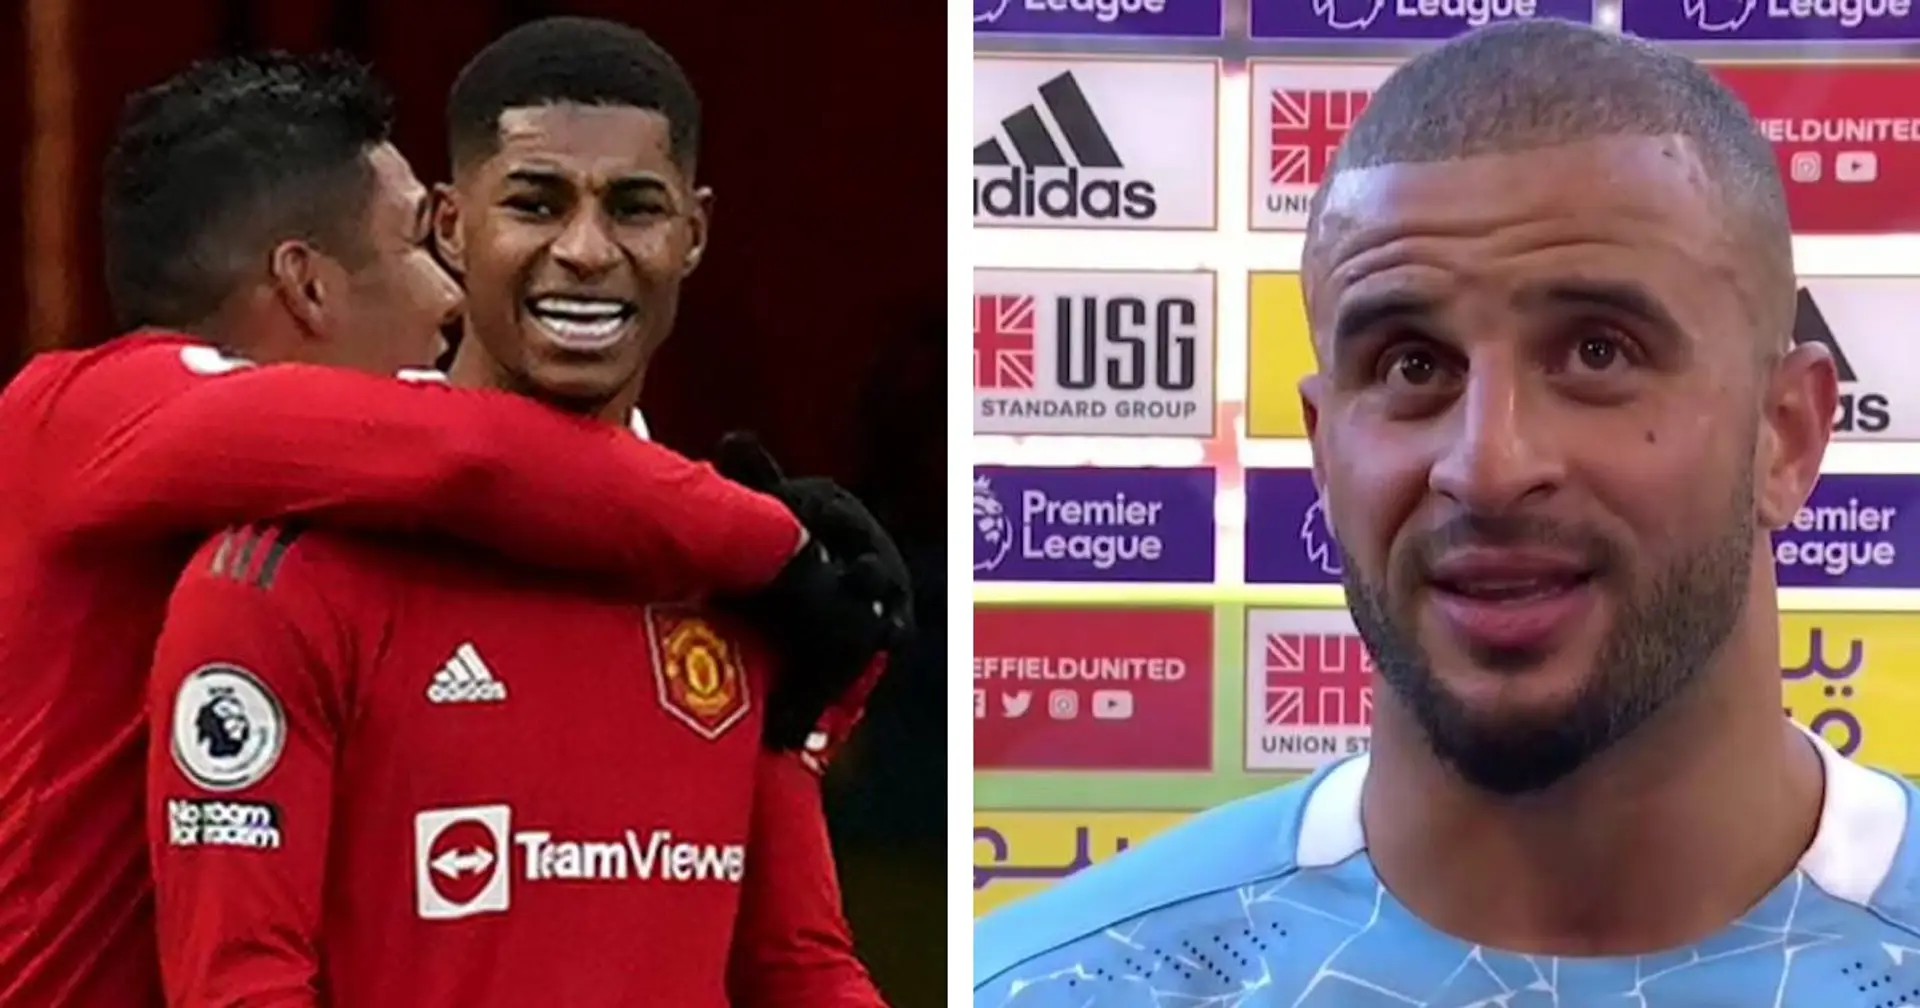 'We lost at Old Trafford and won treble': Kyle Walker insists Man City not looking for revenge